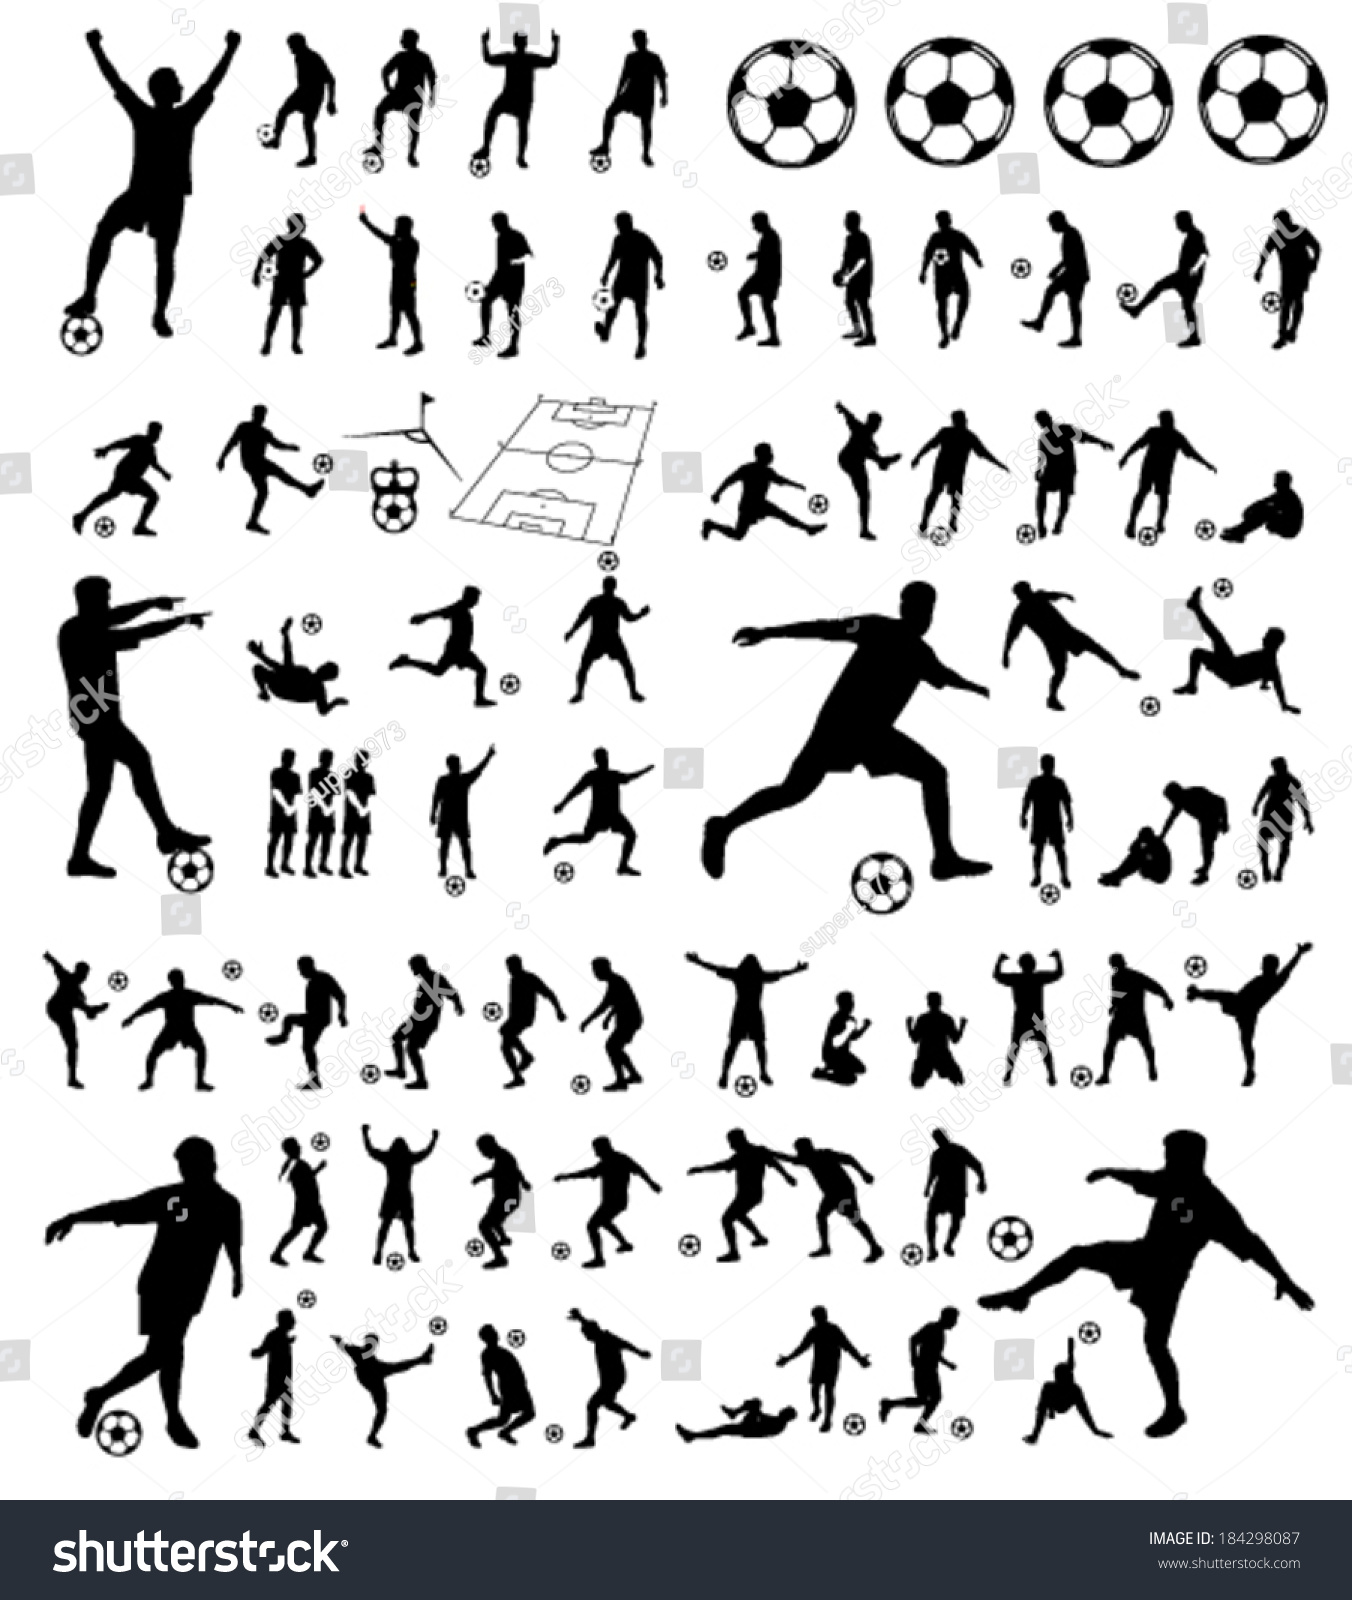 Soccer Players Group Vector Silhouettes Stock Vector (Royalty Free ...